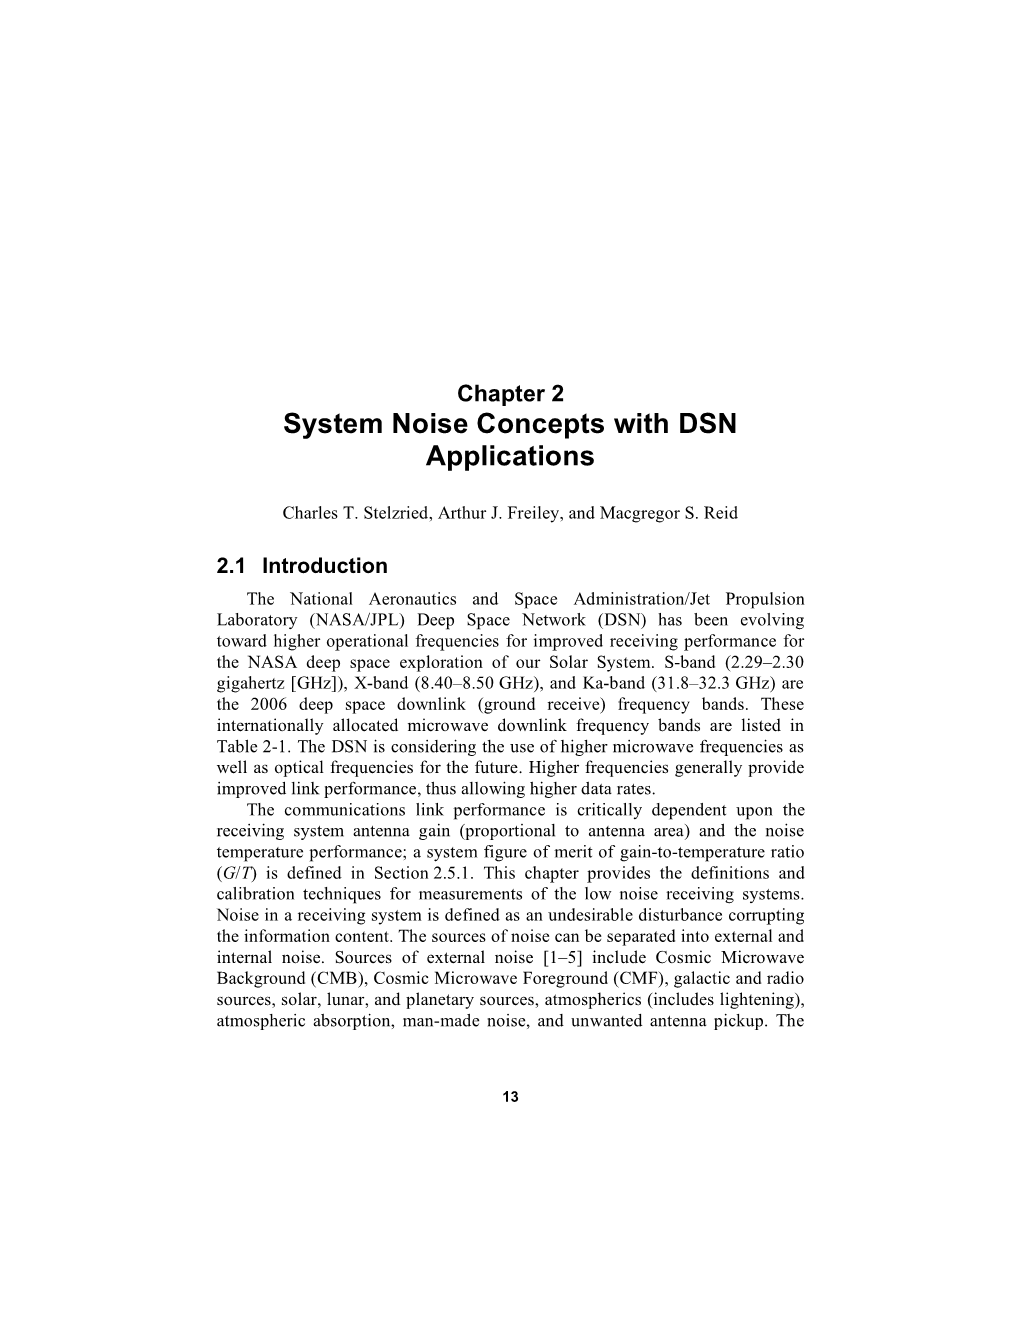 System Noise Concepts with DSN Applications